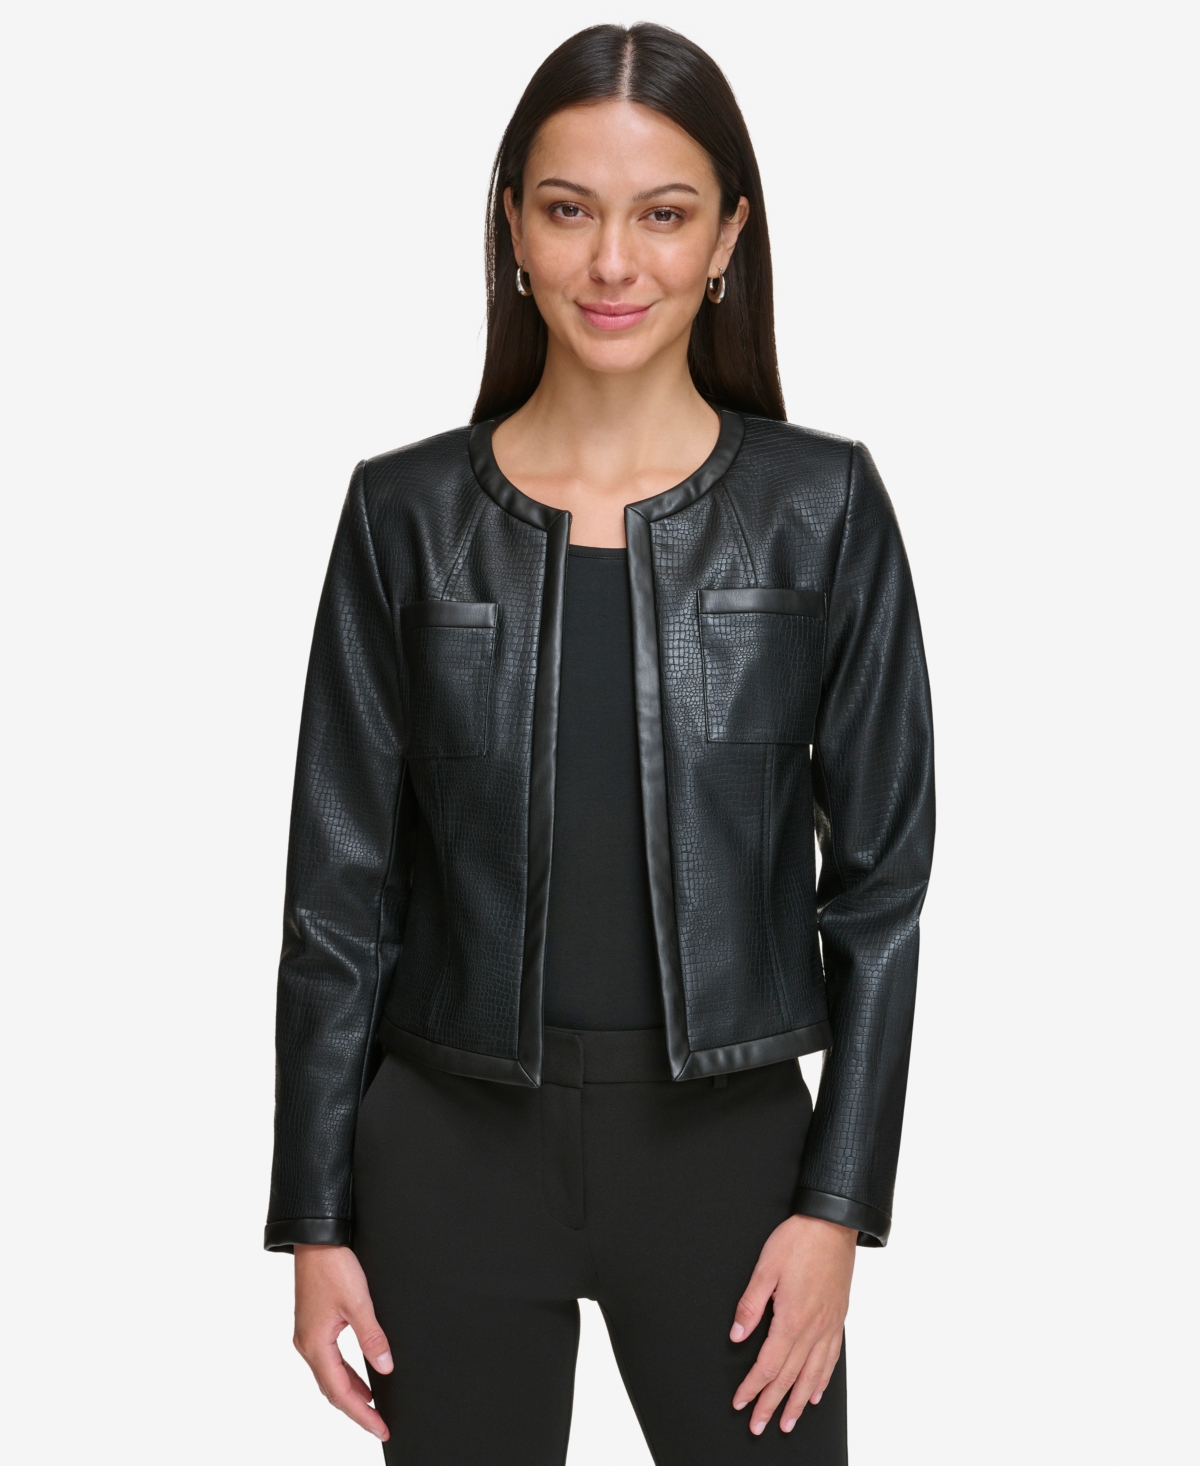 DKNY WOMEN'S COLLARLESS FAUX LEATHER OPEN-FRONT JACKET